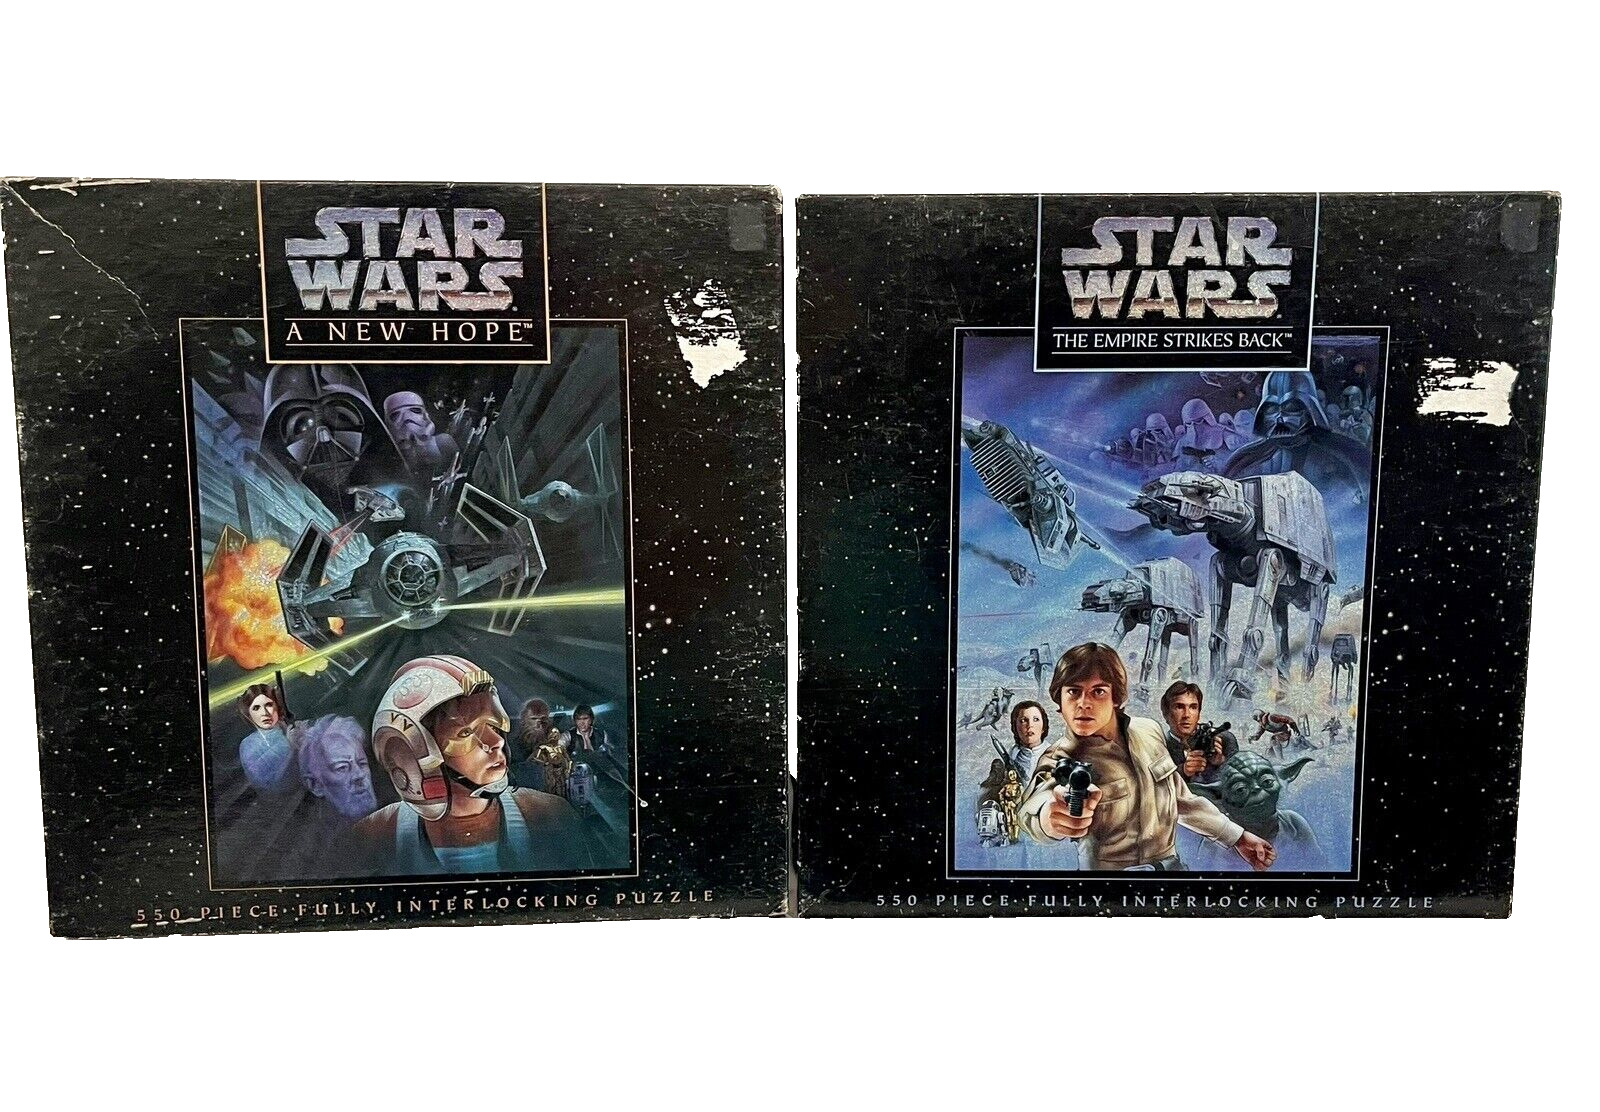 2 STAR WARS Vintage 1995 Puzzles Sealed Never Opened ~ Milton Bradley 550 Pieces